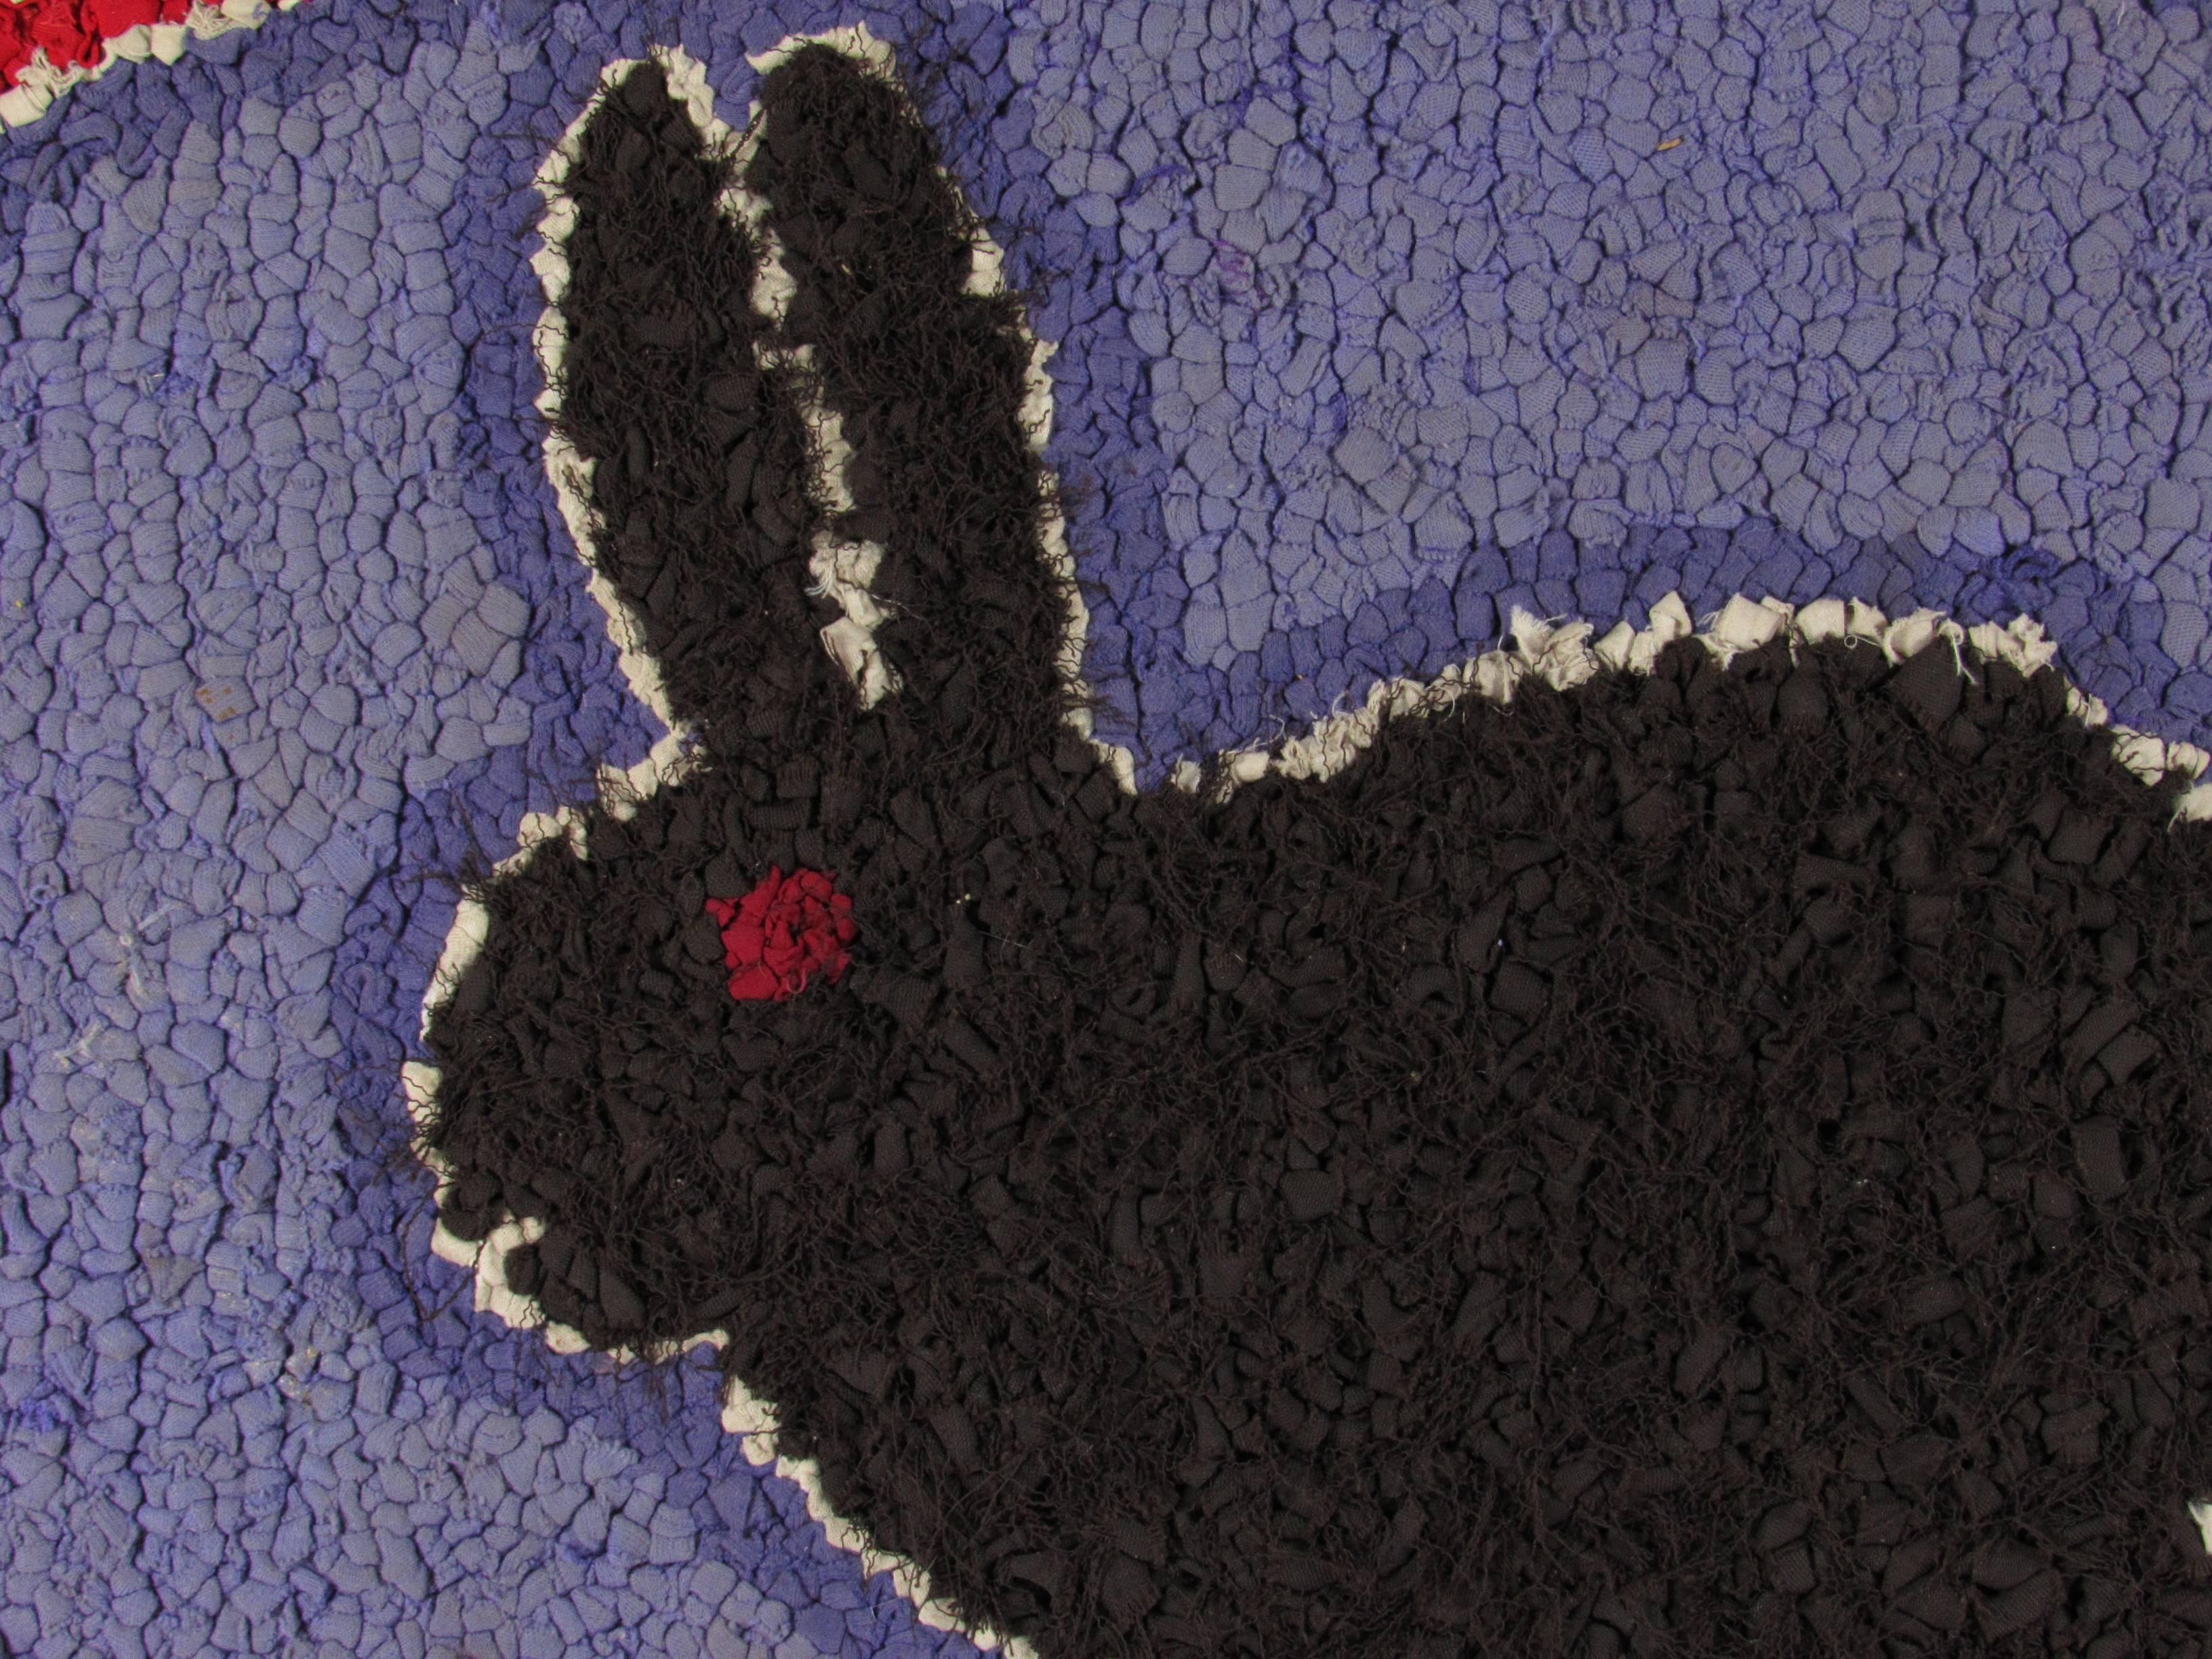 American Folk Art Rabbit in Diamond Hooked Rug In Good Condition For Sale In Concord, MA